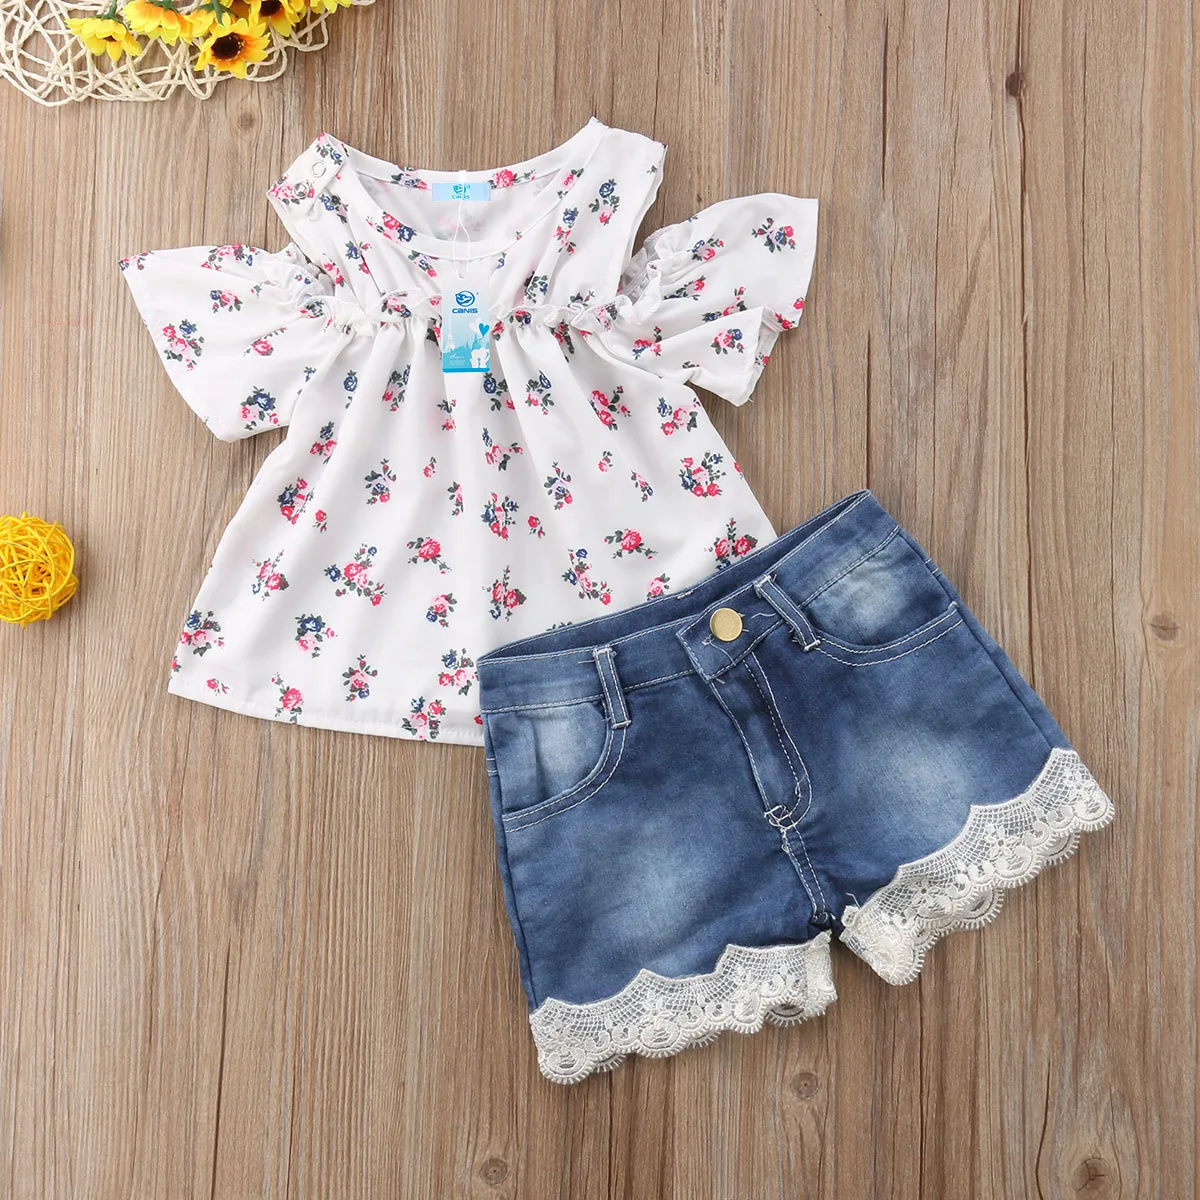 0-4T Newborn Toddler Kid Baby Girls Clothing set Floral Crop tops and Lace shorts Boho Off shoulder Fashion Cute Outfit set